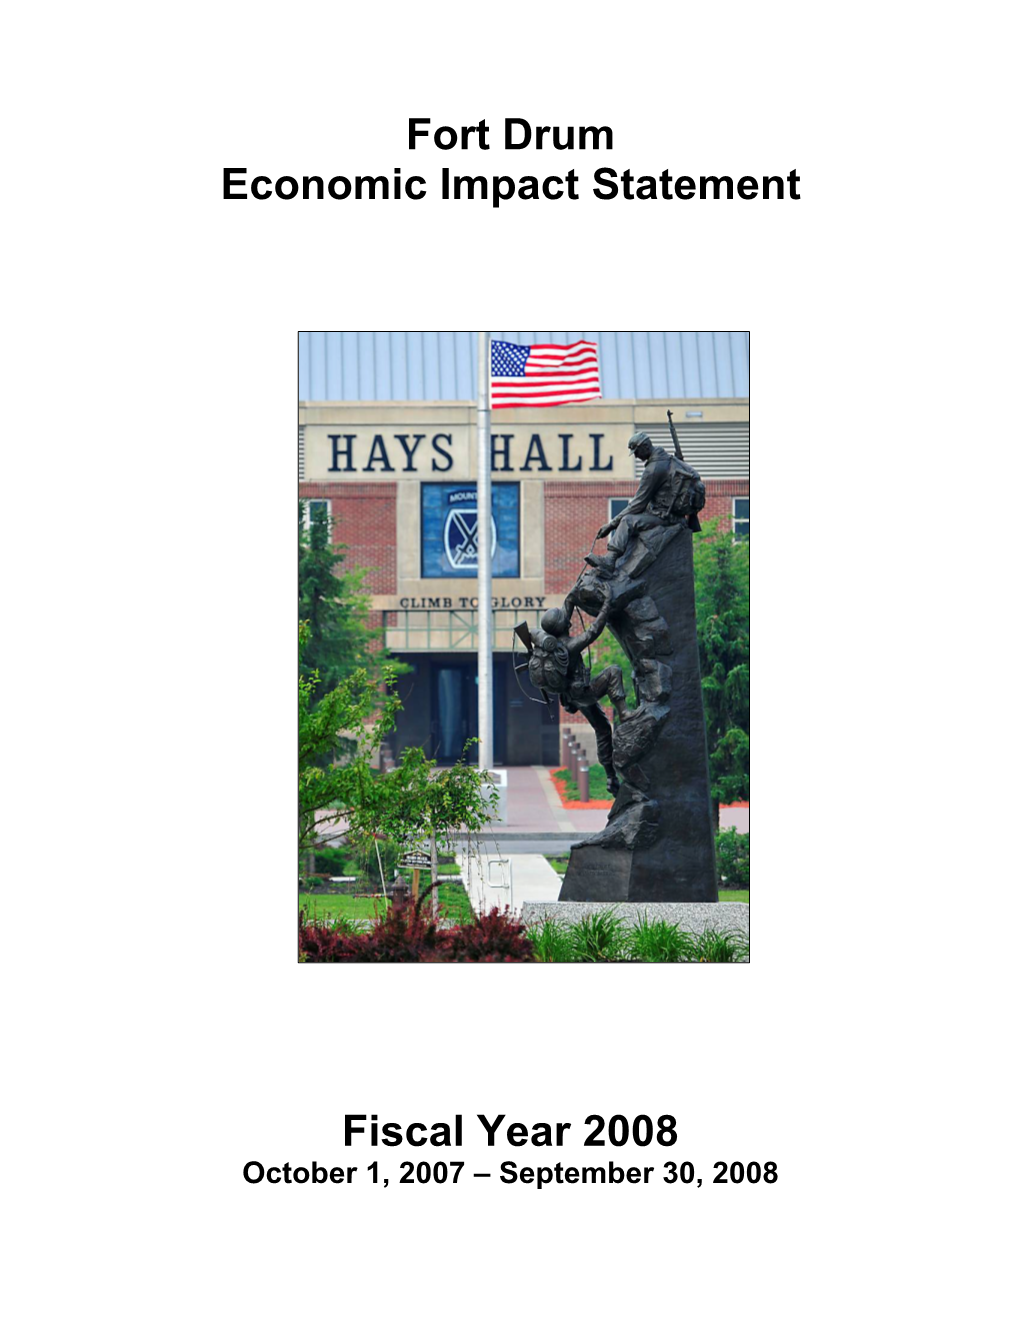 Fort Drum Economic Impact Statement Fiscal Year 2008